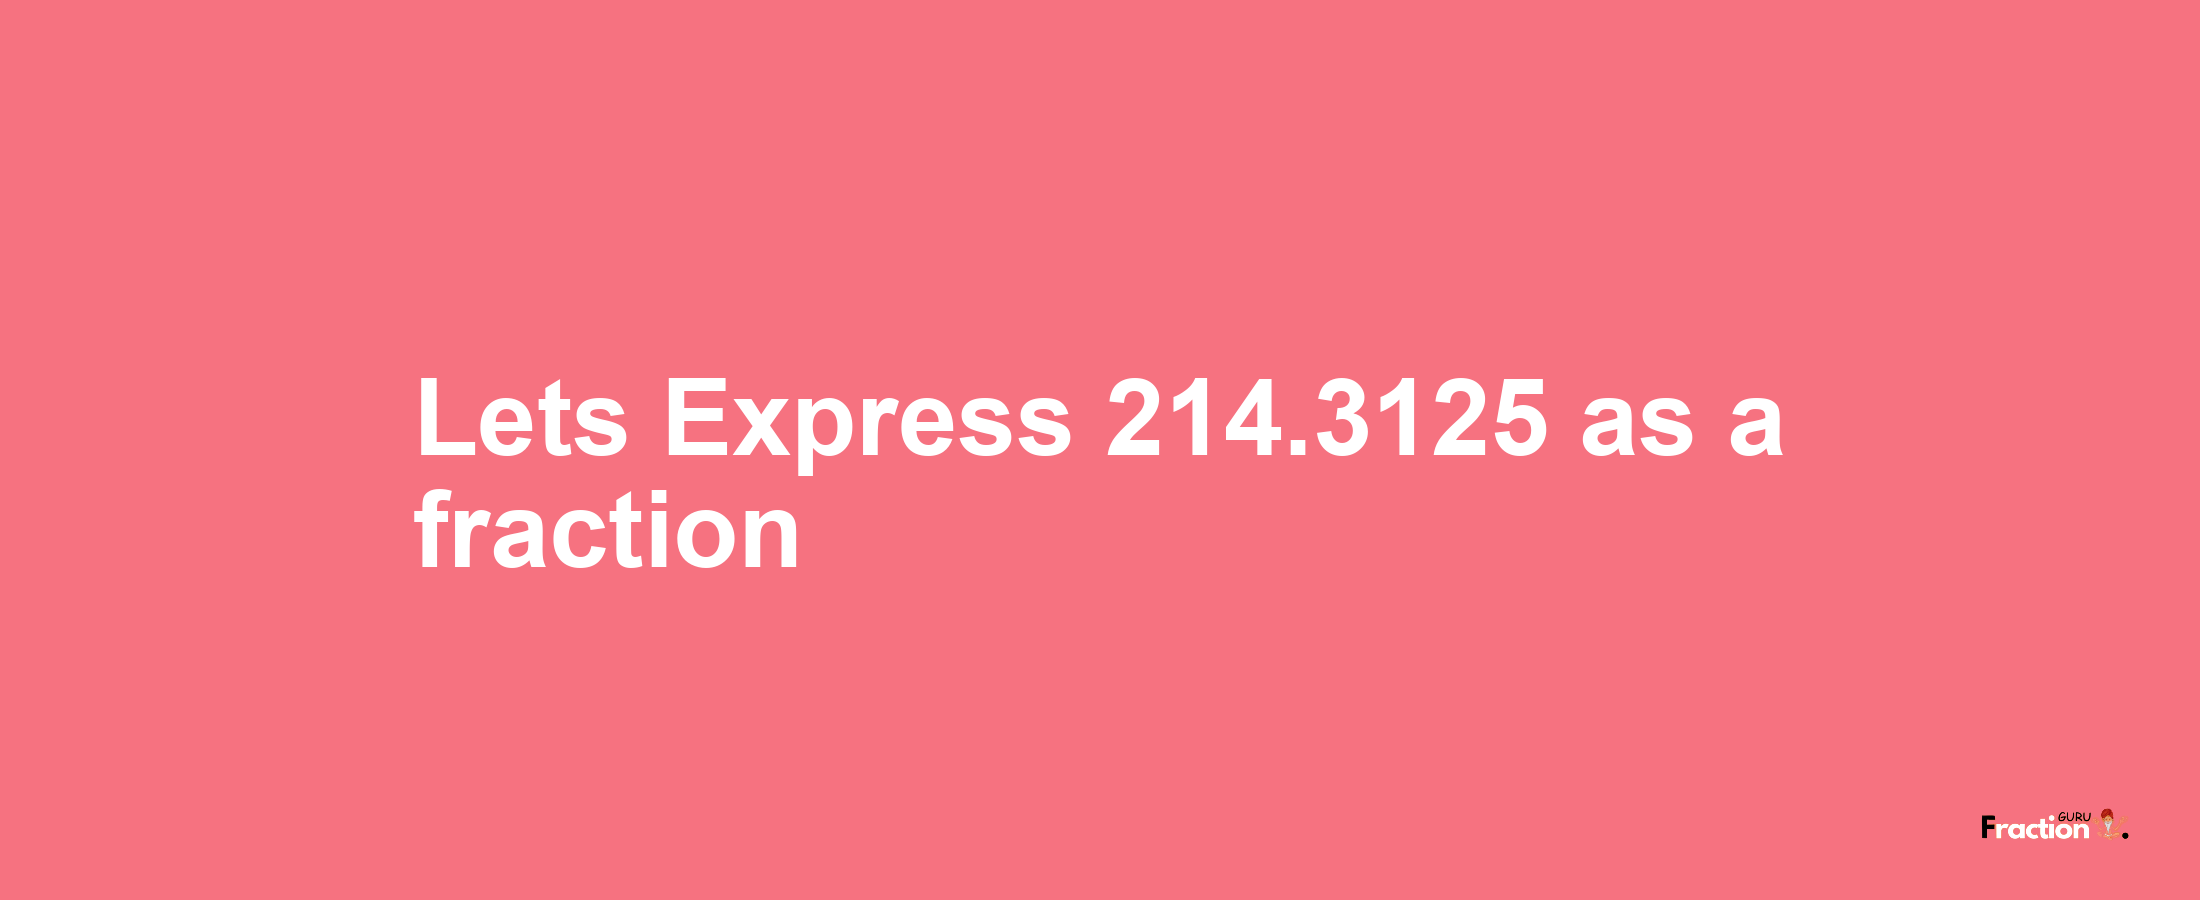 Lets Express 214.3125 as afraction